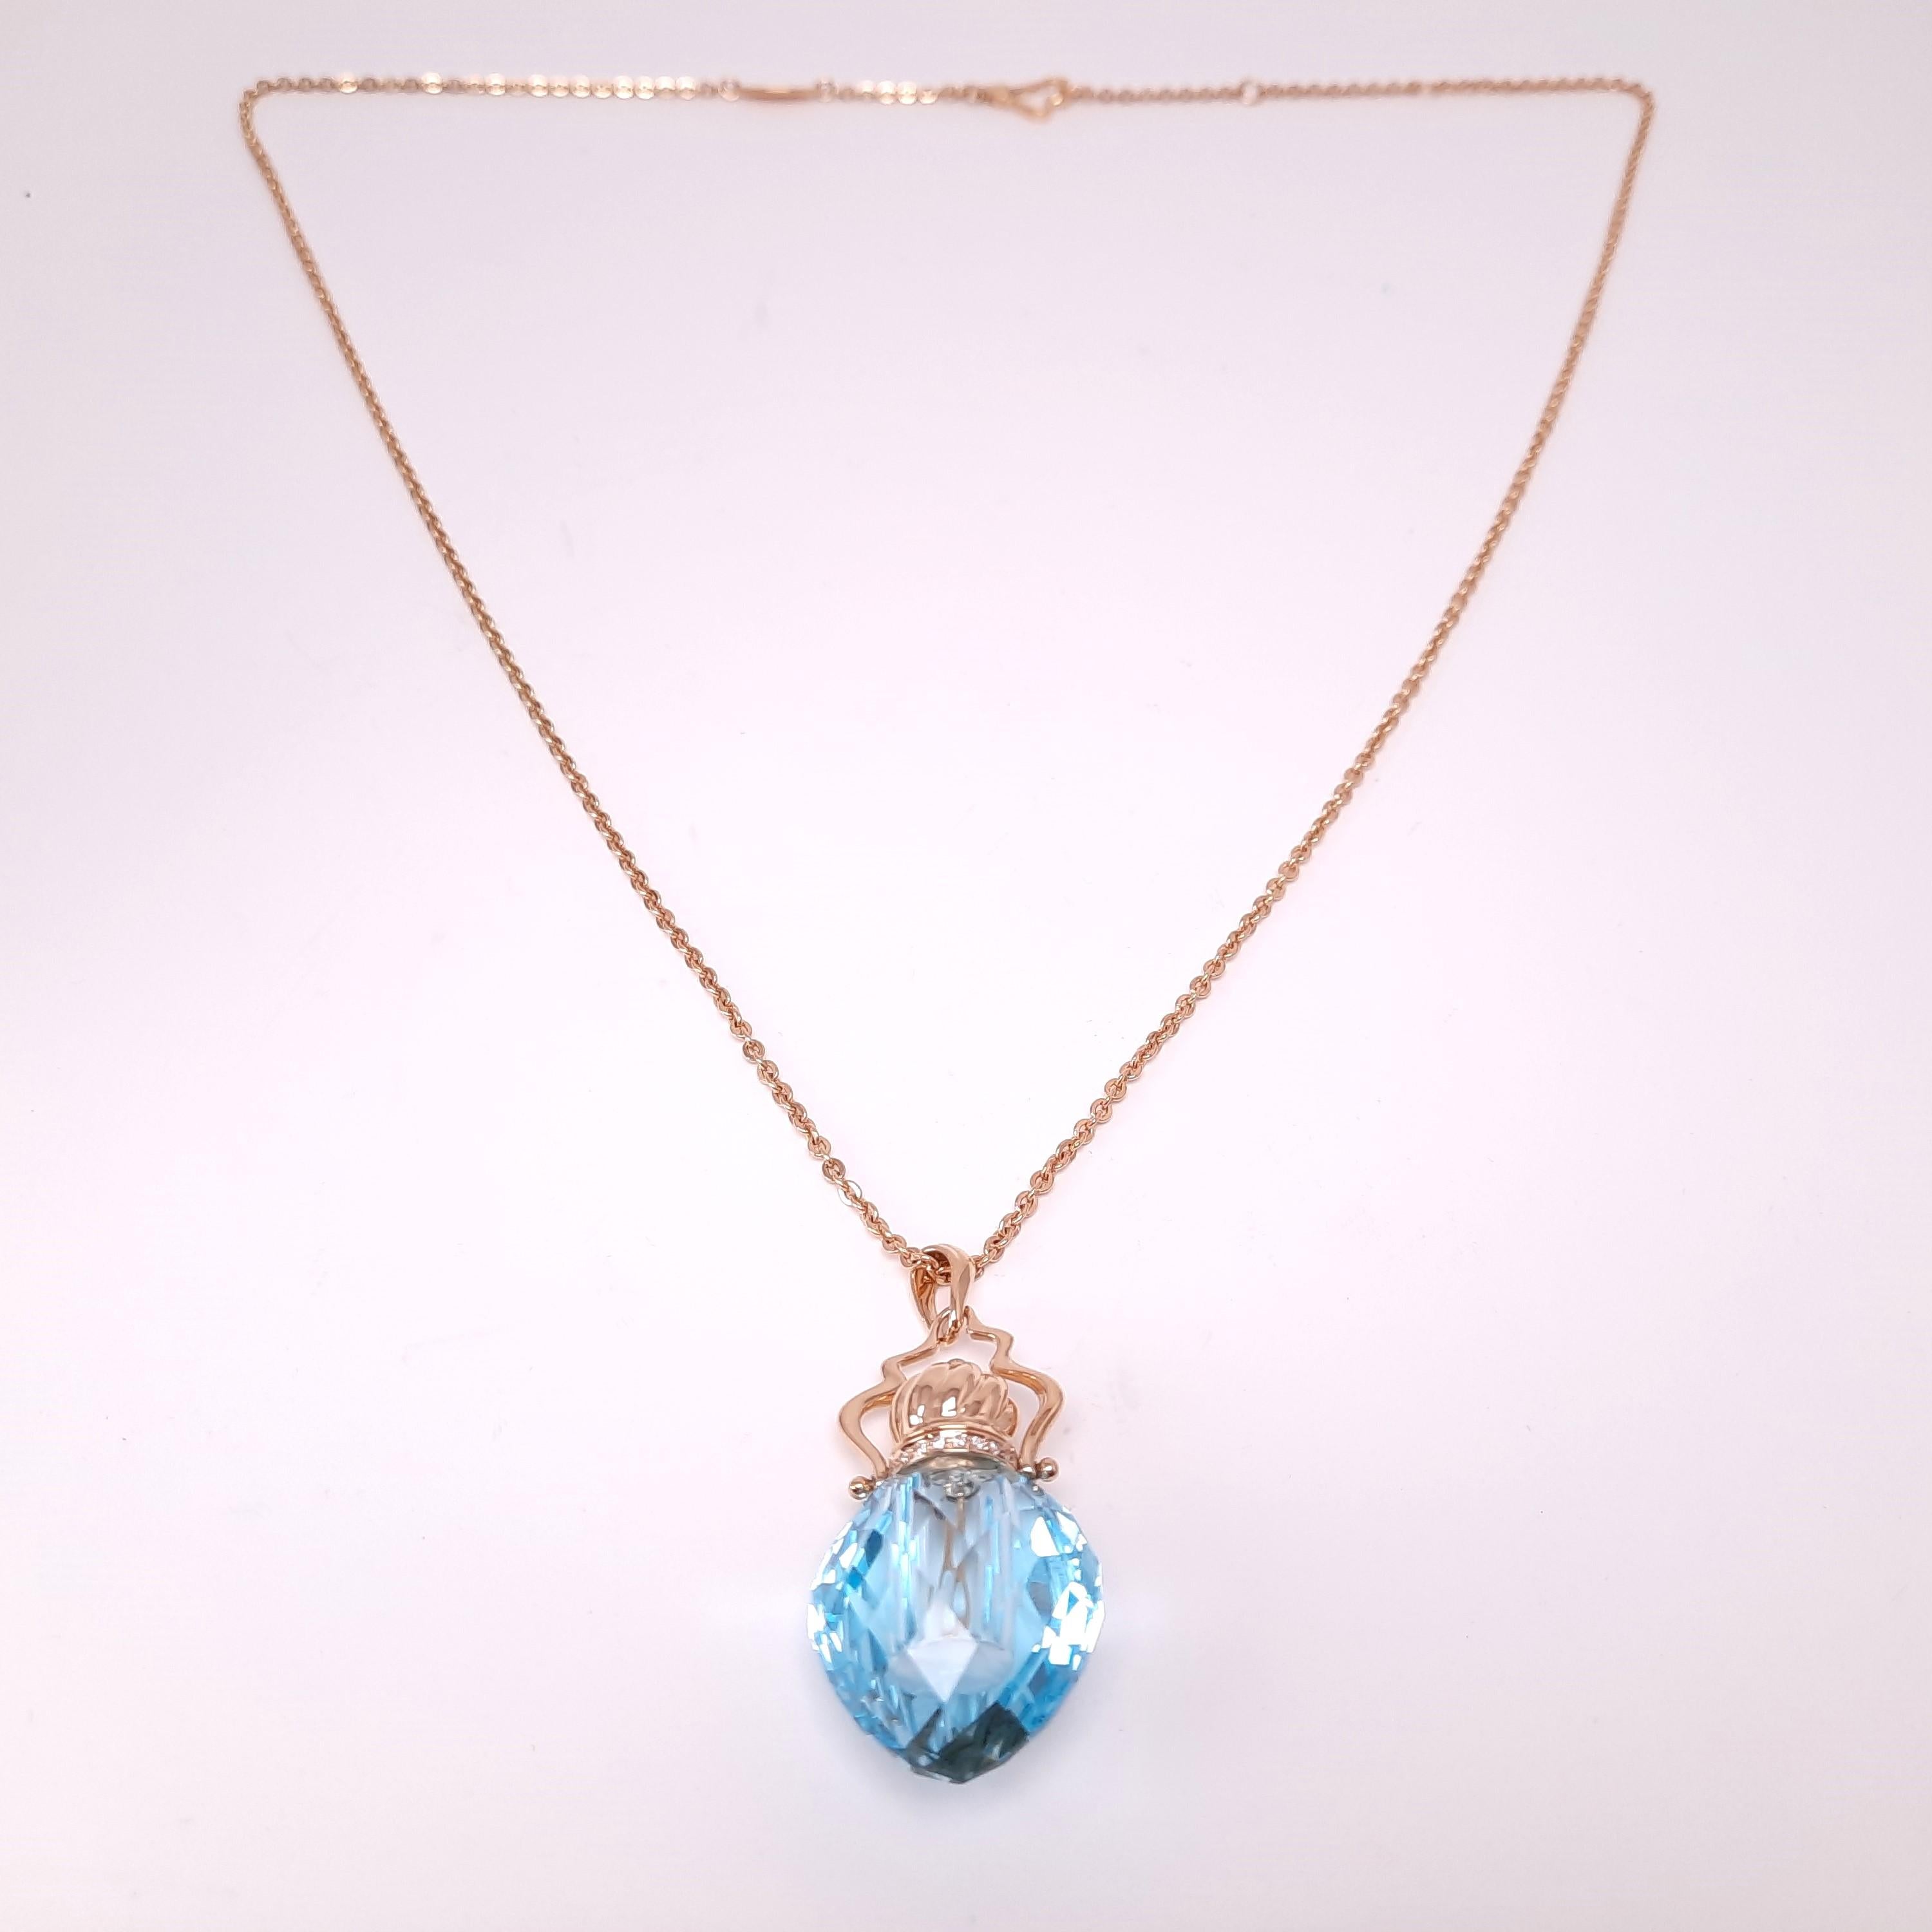 MOISEIKIN® invites you to a unique opportunity to keep your favourite scents at the very heart. Inspired by an ancient tradition, this precious pendant necklace has an elegant perfume bottle. The sky blue topaz is specially carved in multi-facet and